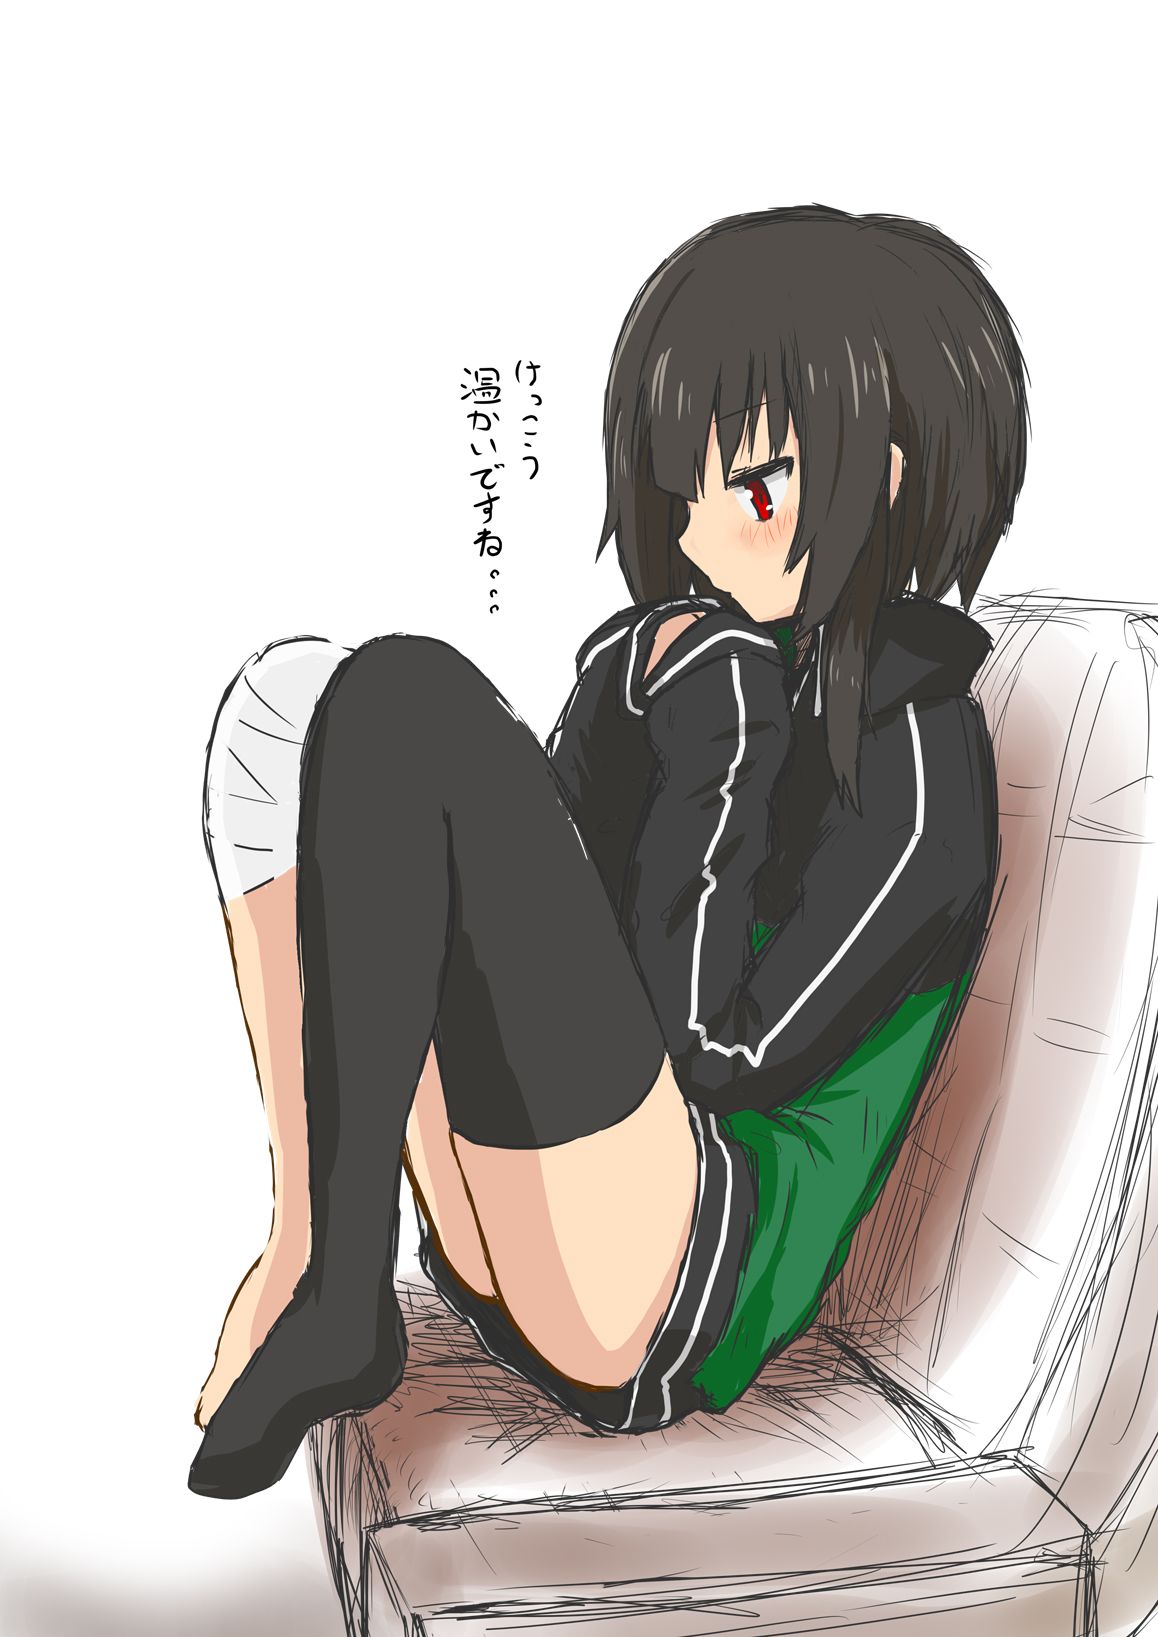 The second erotic image of the sporty girl wearing the jersey wwww part3 15